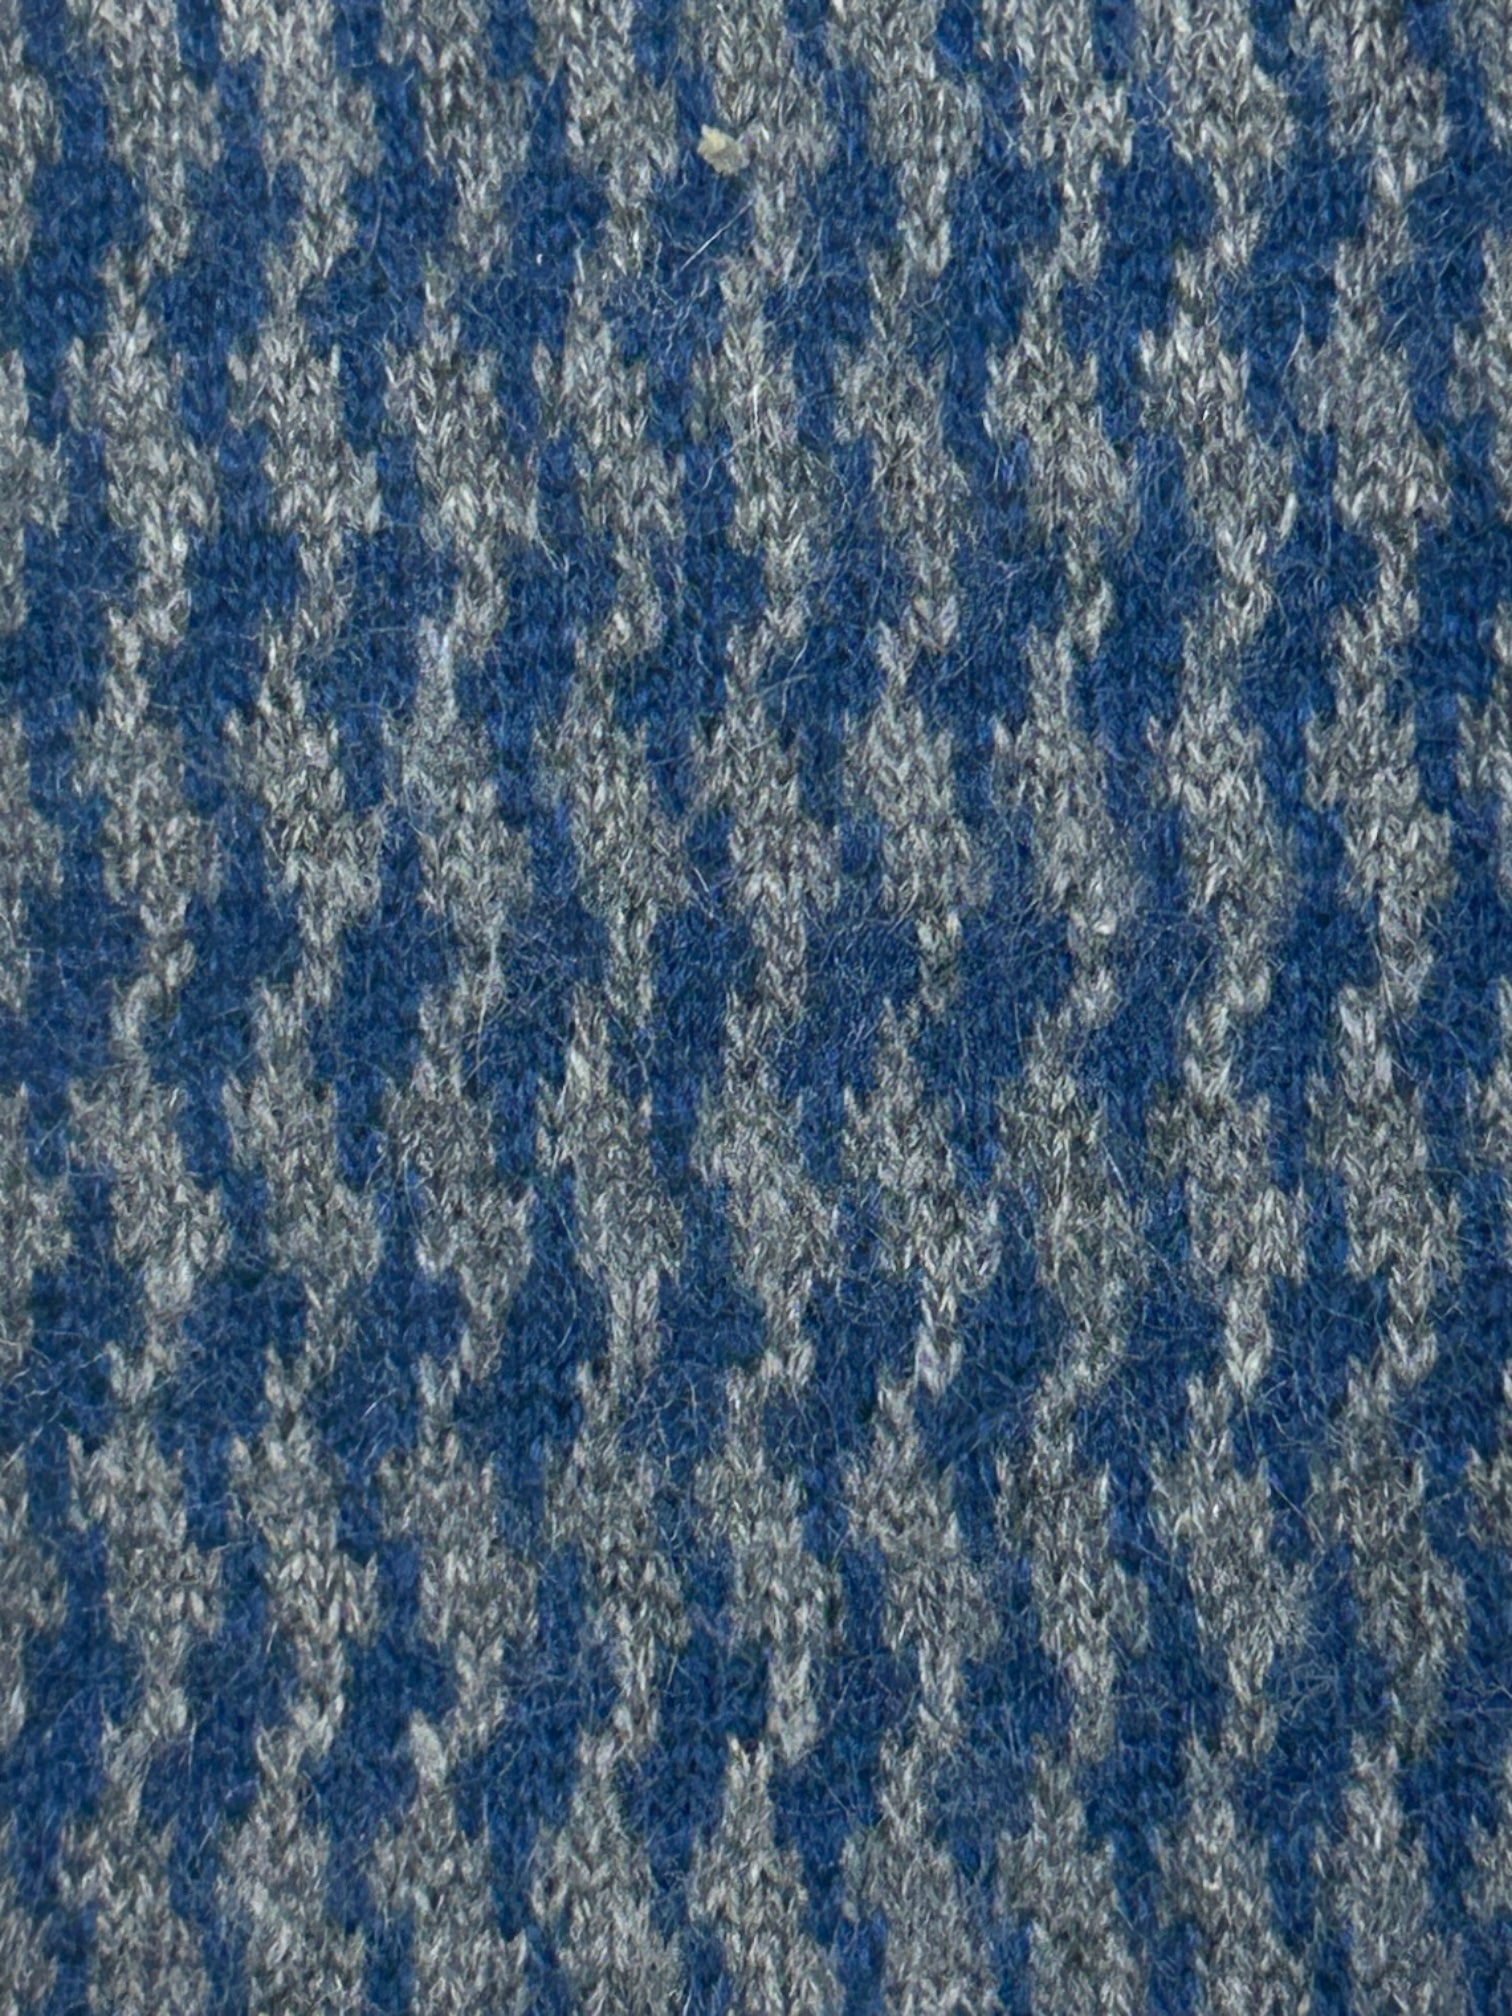 Kiton Grey and Blue Cashmere ZigZag Knitted Tie